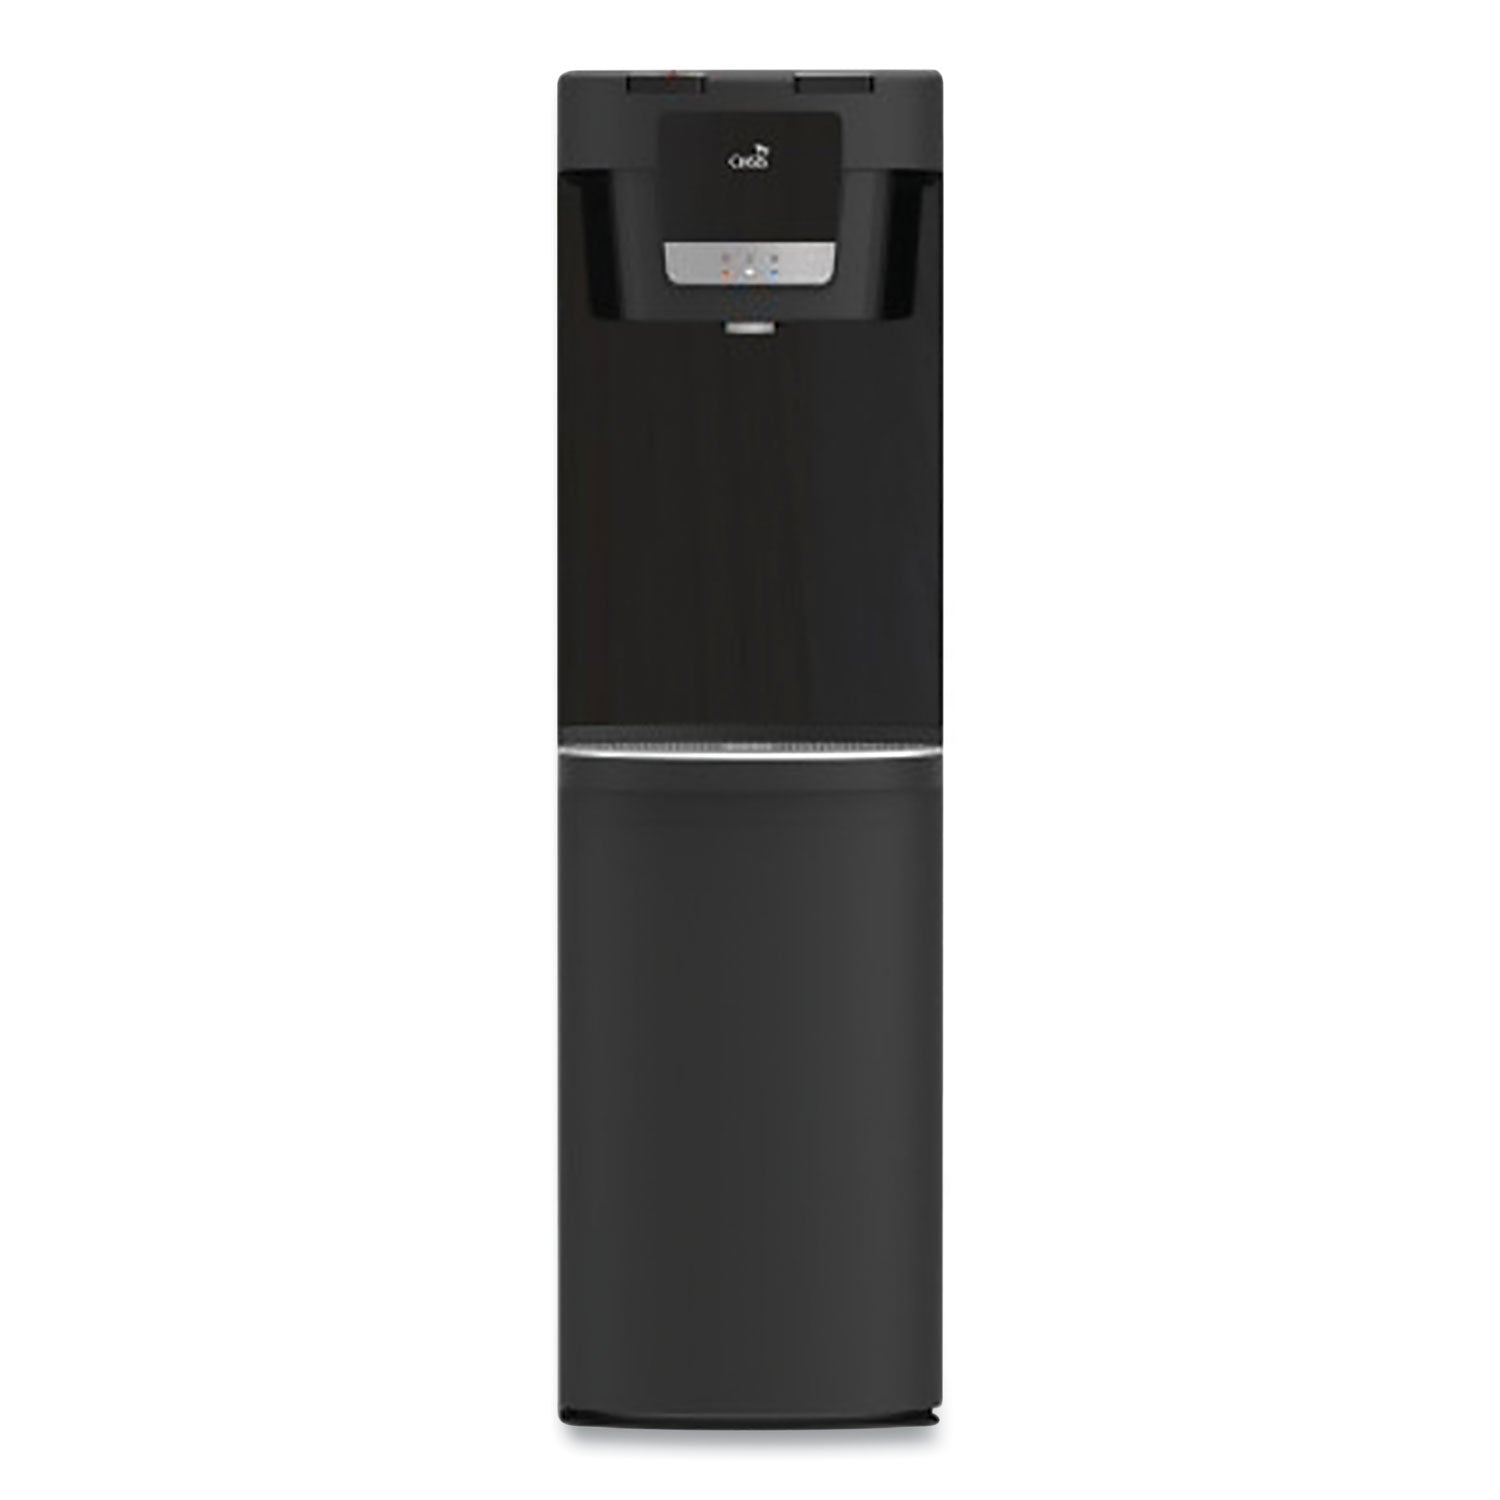 maxxfill-flex-hot-and-cold-water-dispenser-211-gal-hot-water-per-hour-122-x-142-x-4233-black-stainless-steel_oas506815c - 1